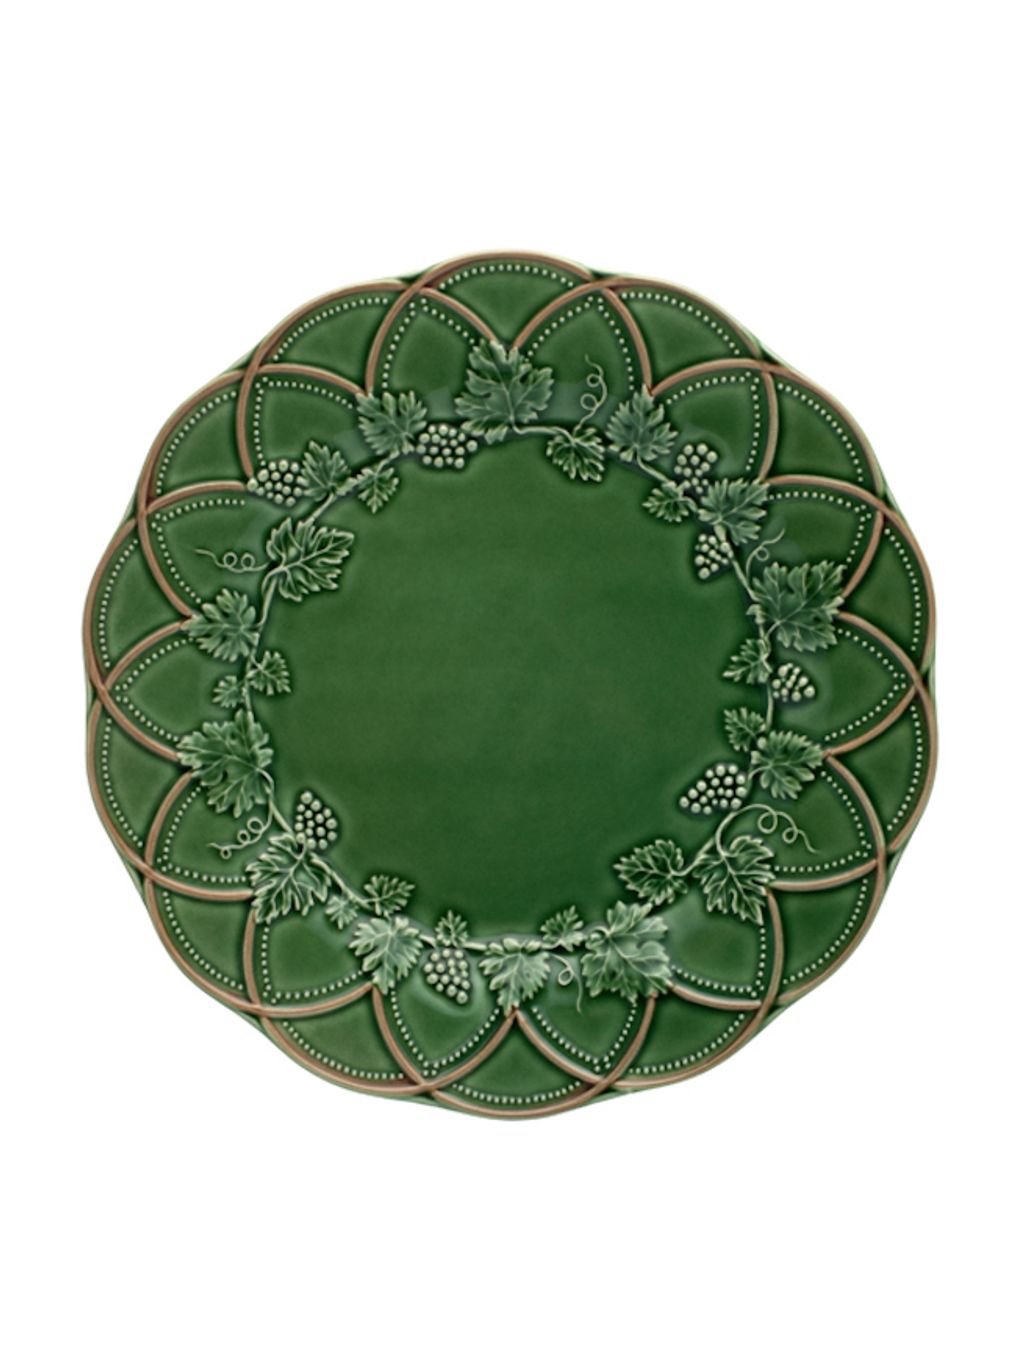 65002451 hunting fruit plate 24 green_ brown x4